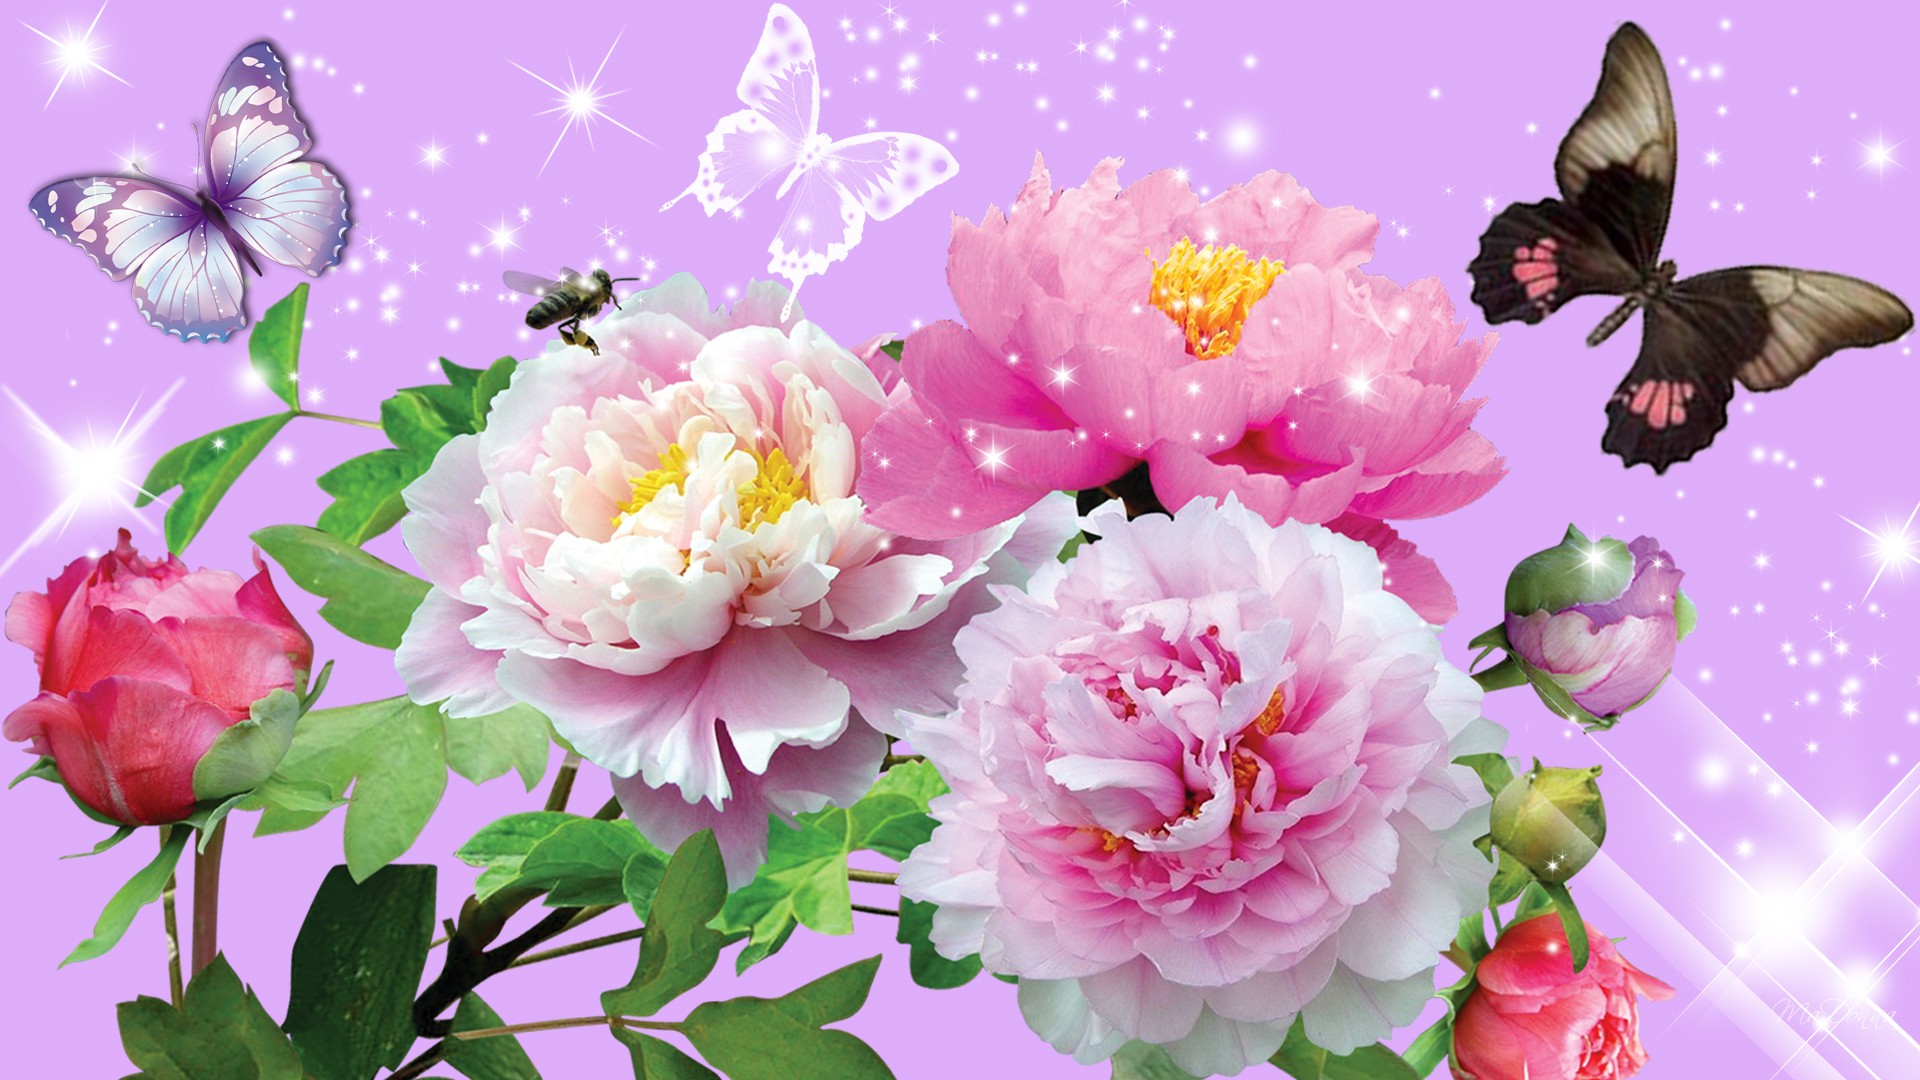 Wallpapers Of The Day: Flower – 1920x1080 px Flower Backgrounds ...